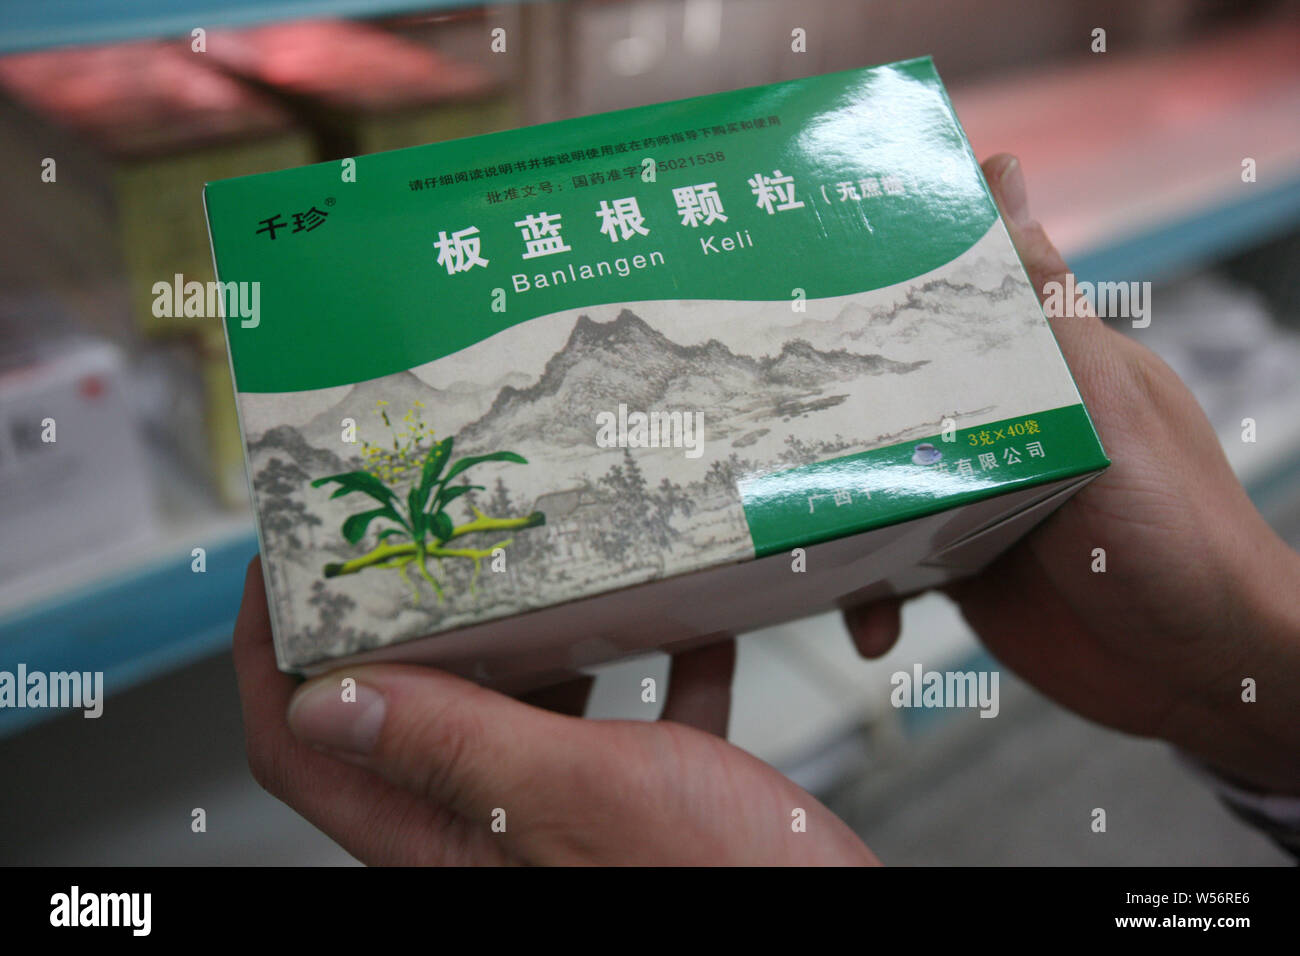 --FILE--A chemist shows a box of isatis indigotica root or 'banlangen,' a traditional Chinese medicinal herb used for the prevention and treatment of Stock Photo